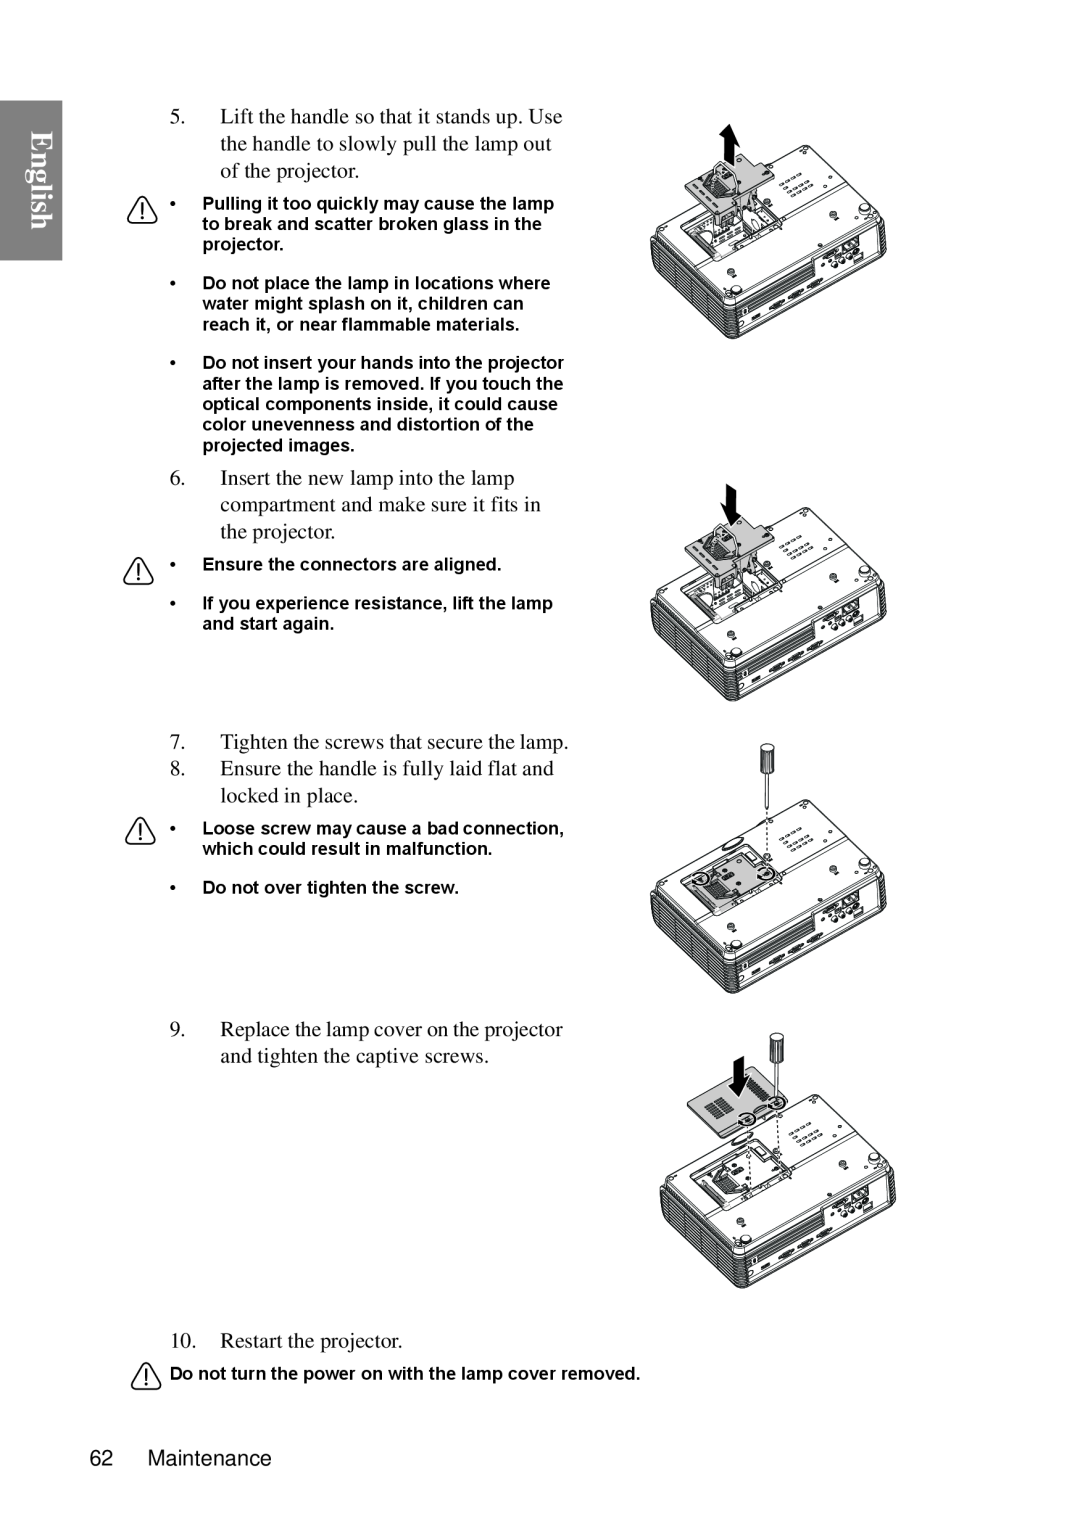 BenQ MP670 user manual English, of the projector 